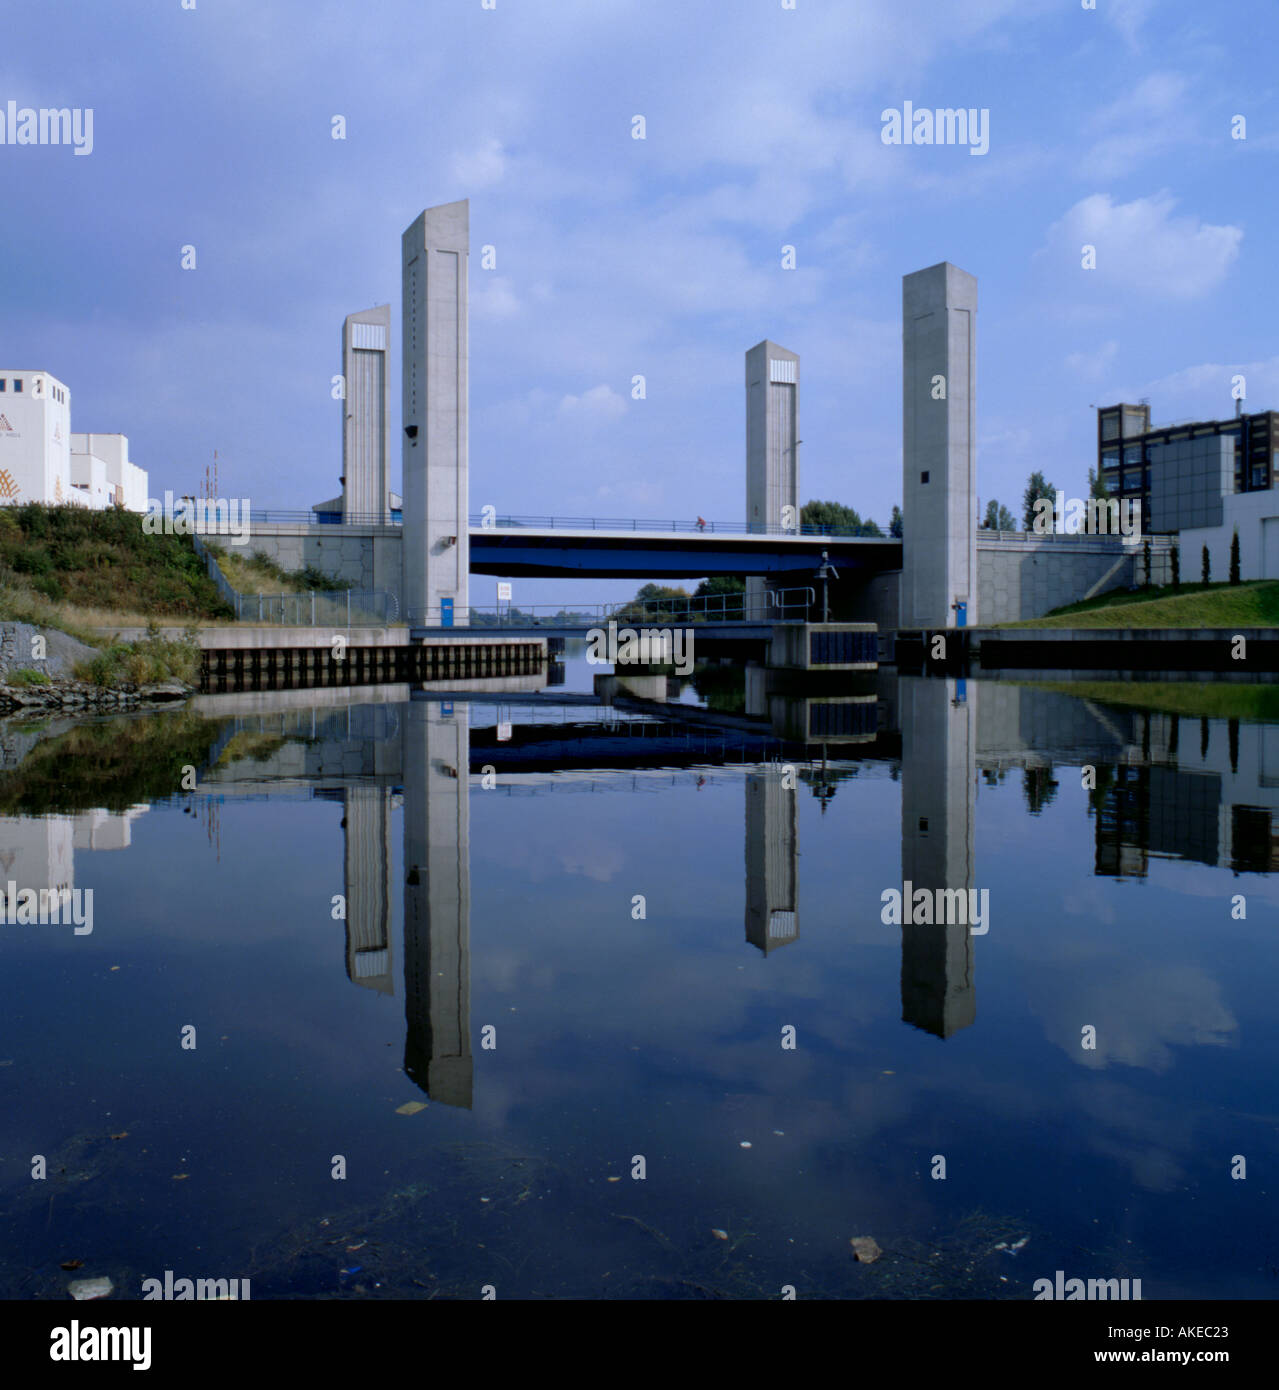 Centenary Bridge over the Manchester Ship Canal, Trafford Park, Greater Manchester, England, UK. Stock Photo